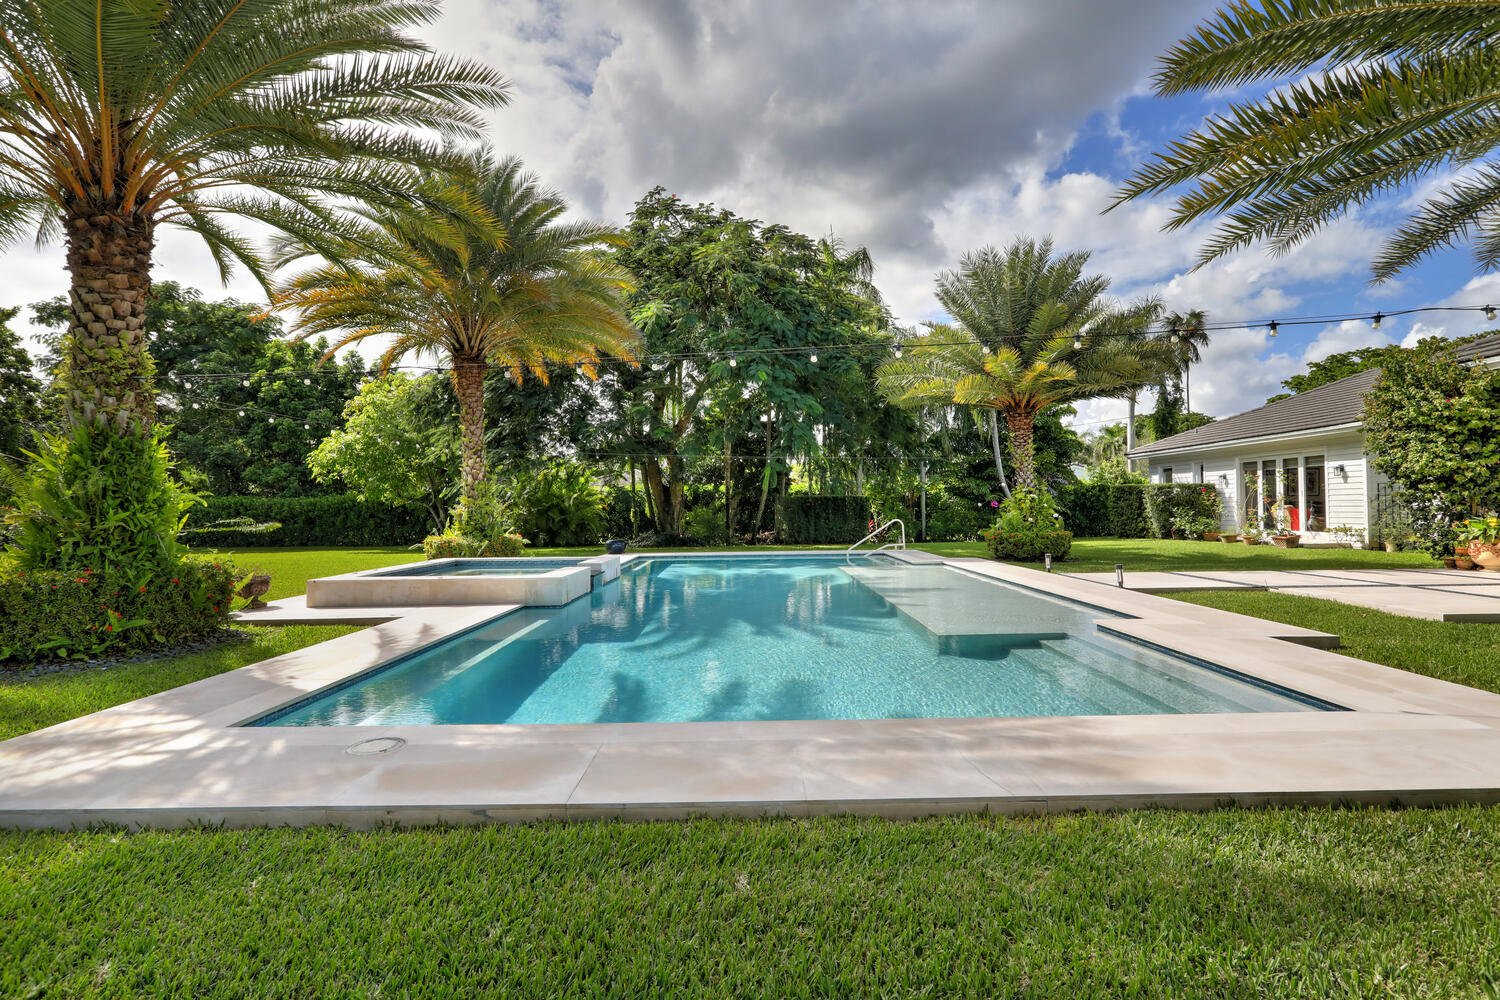 Master Brokers Forum Listing: Check Out This 'Hamptons Meets Key West' Style North Pinecrest Home Asking $5.8 Million 14.jpg